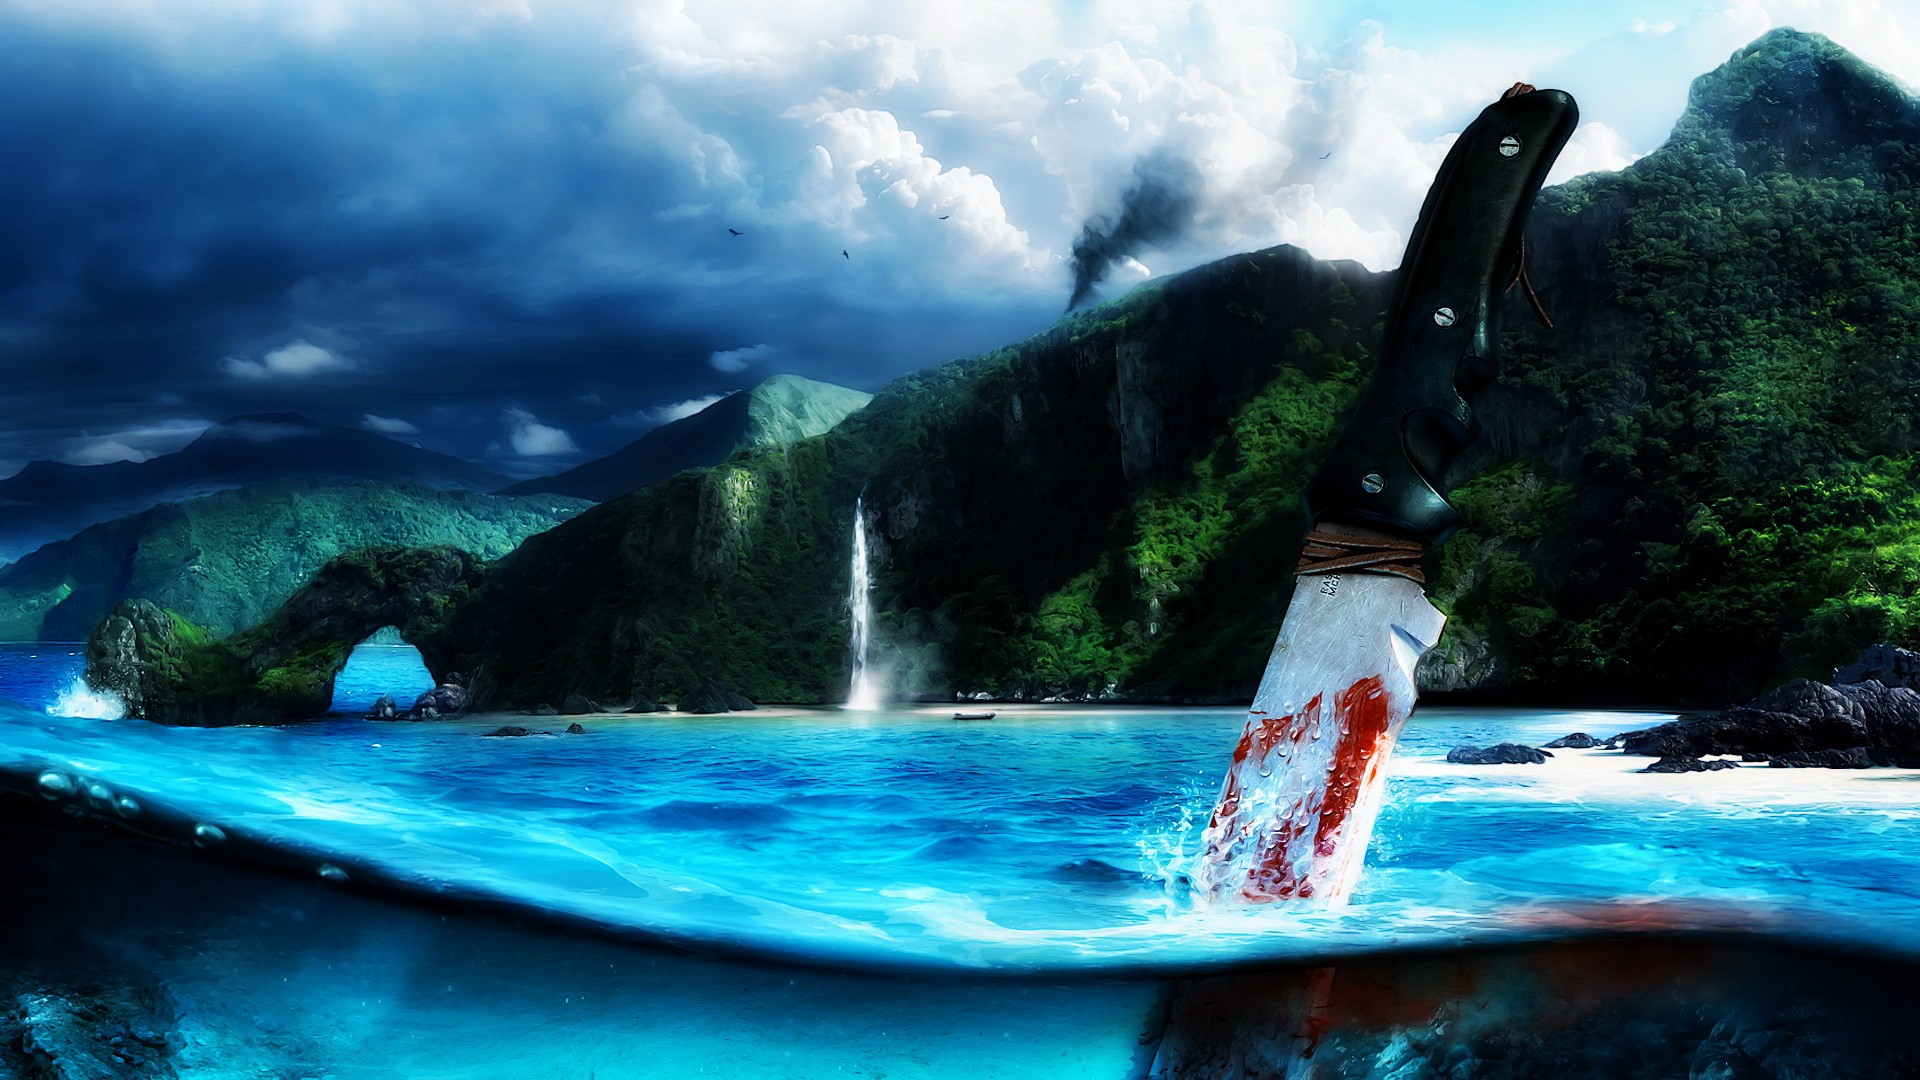 Wallpaper, sea, artwork, blood, surfing, Far Cry ocean, wind wave, extreme sport, water feature 1920x1080